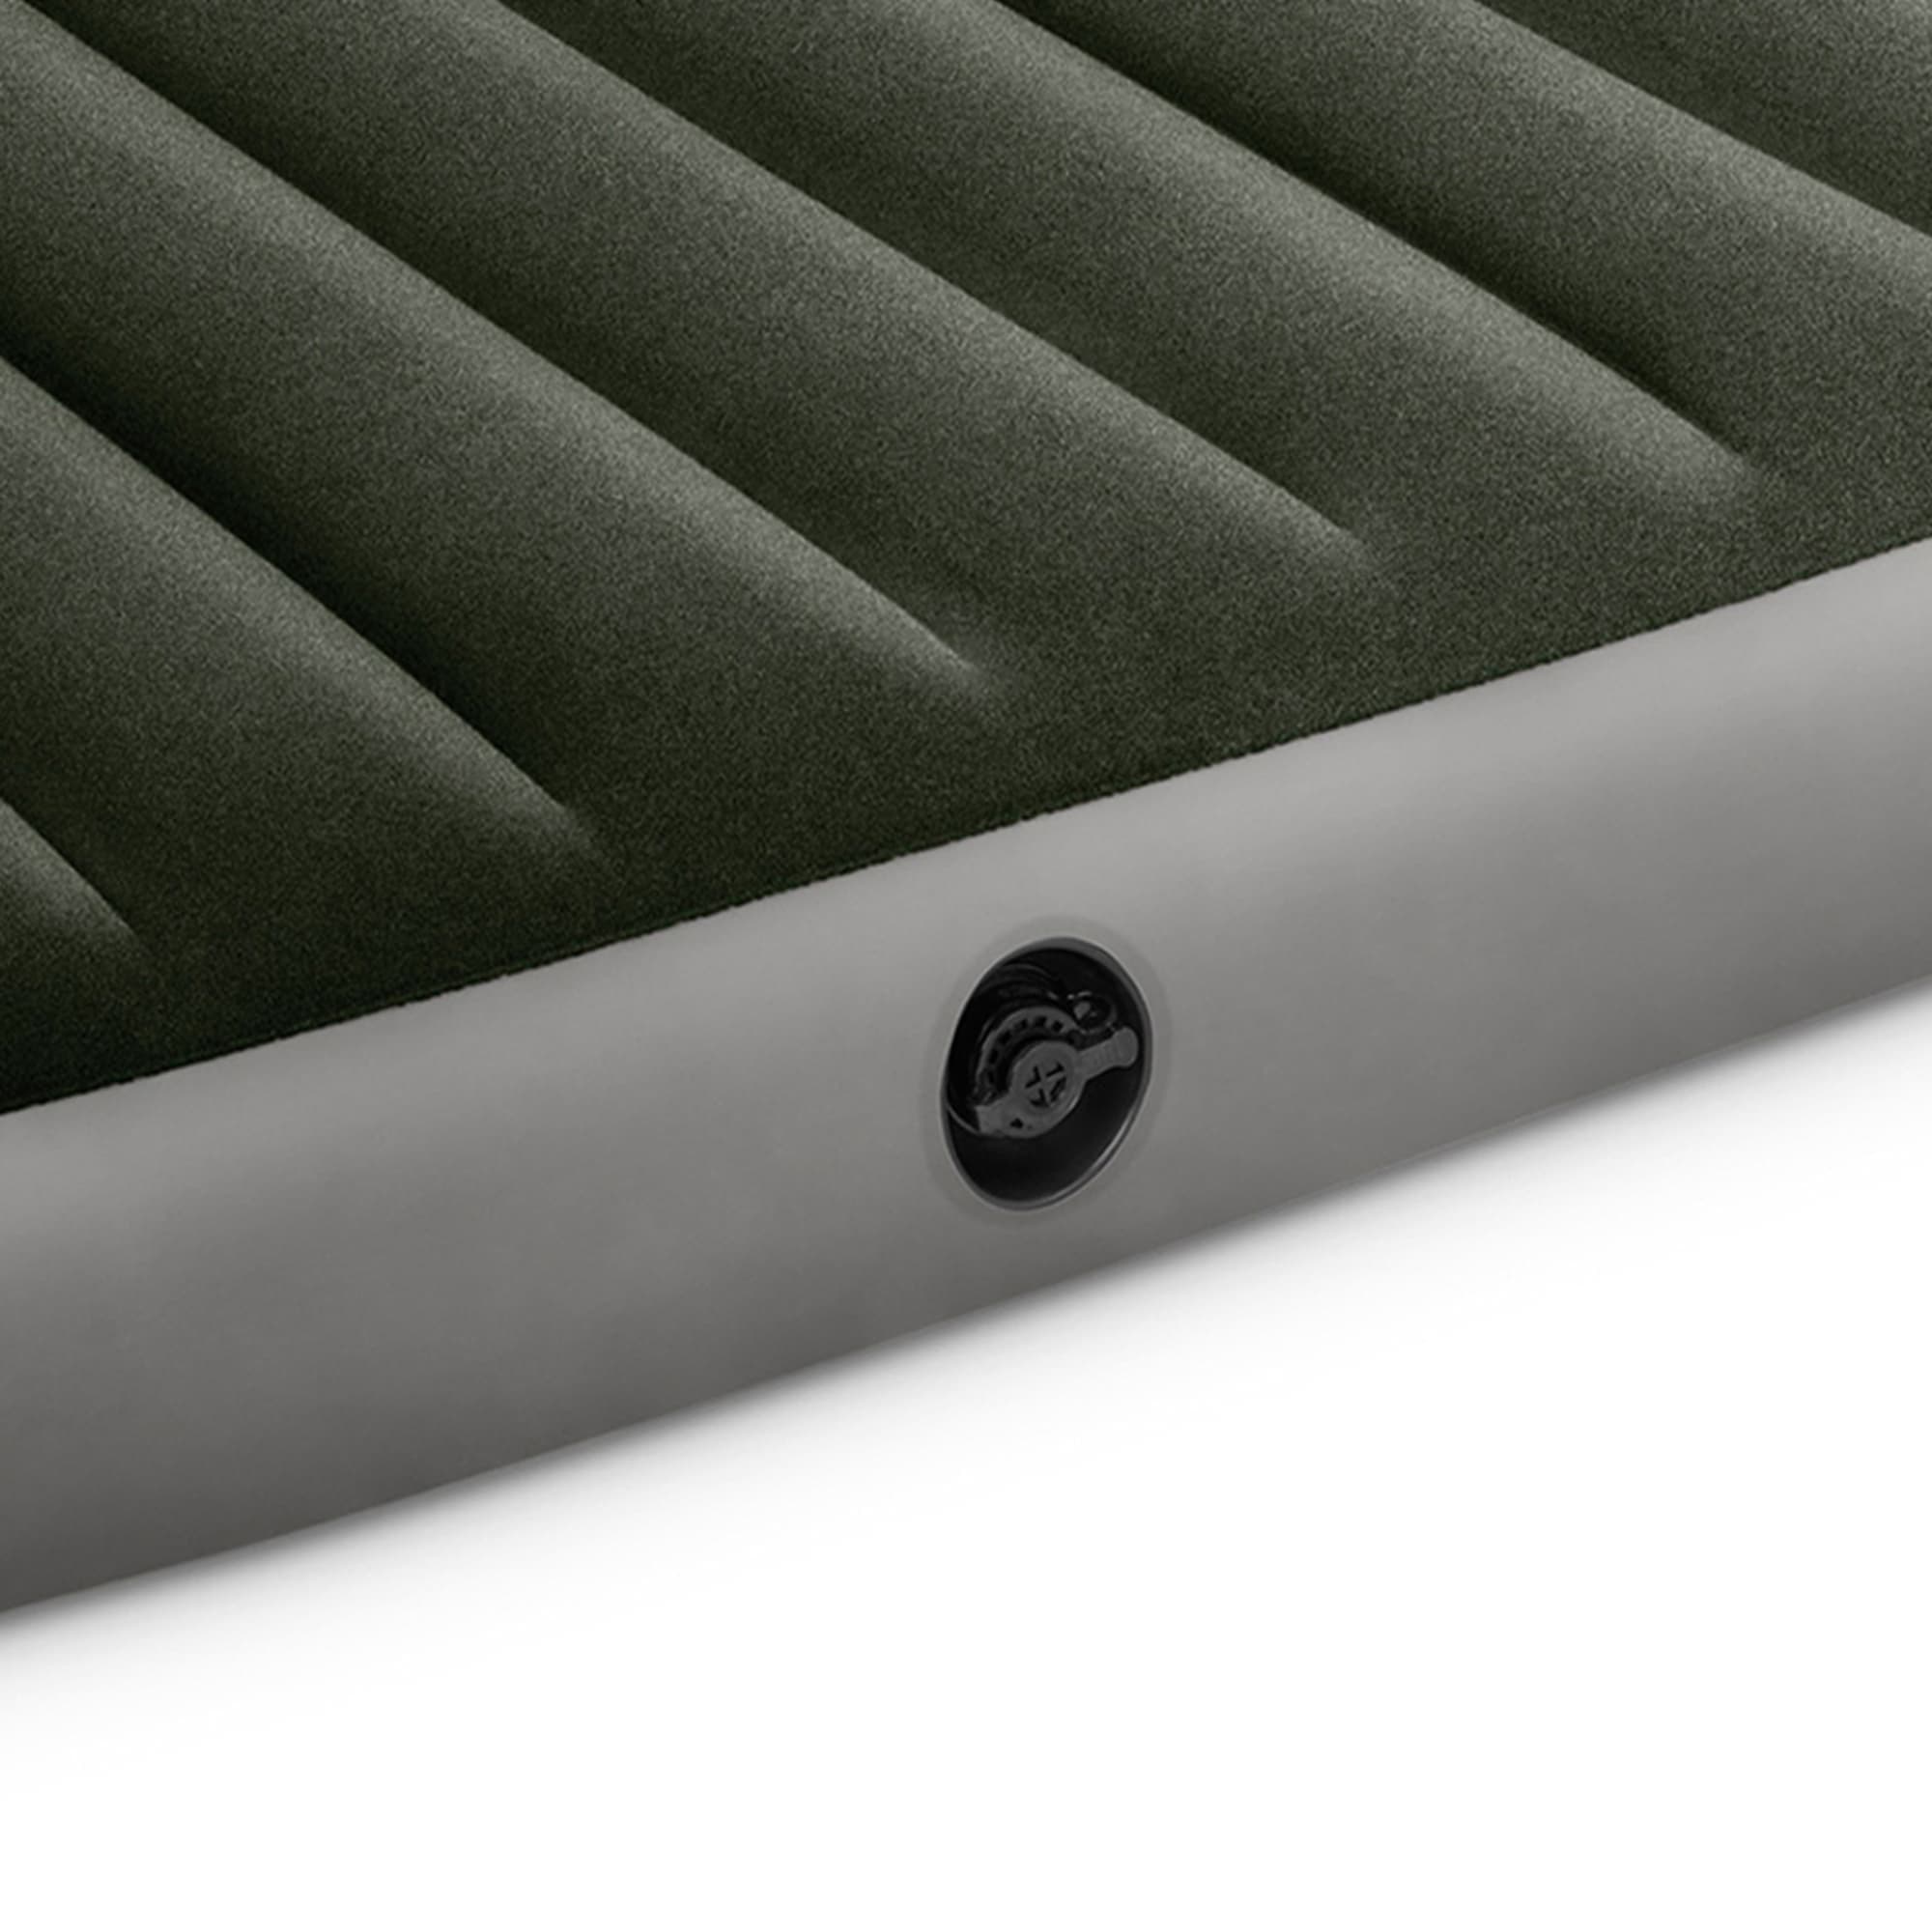 Intex Prestige Durabeam Downy Queen Air Bed with Battery Pump, Green $40.00 EACH, CASE PACK OF 3